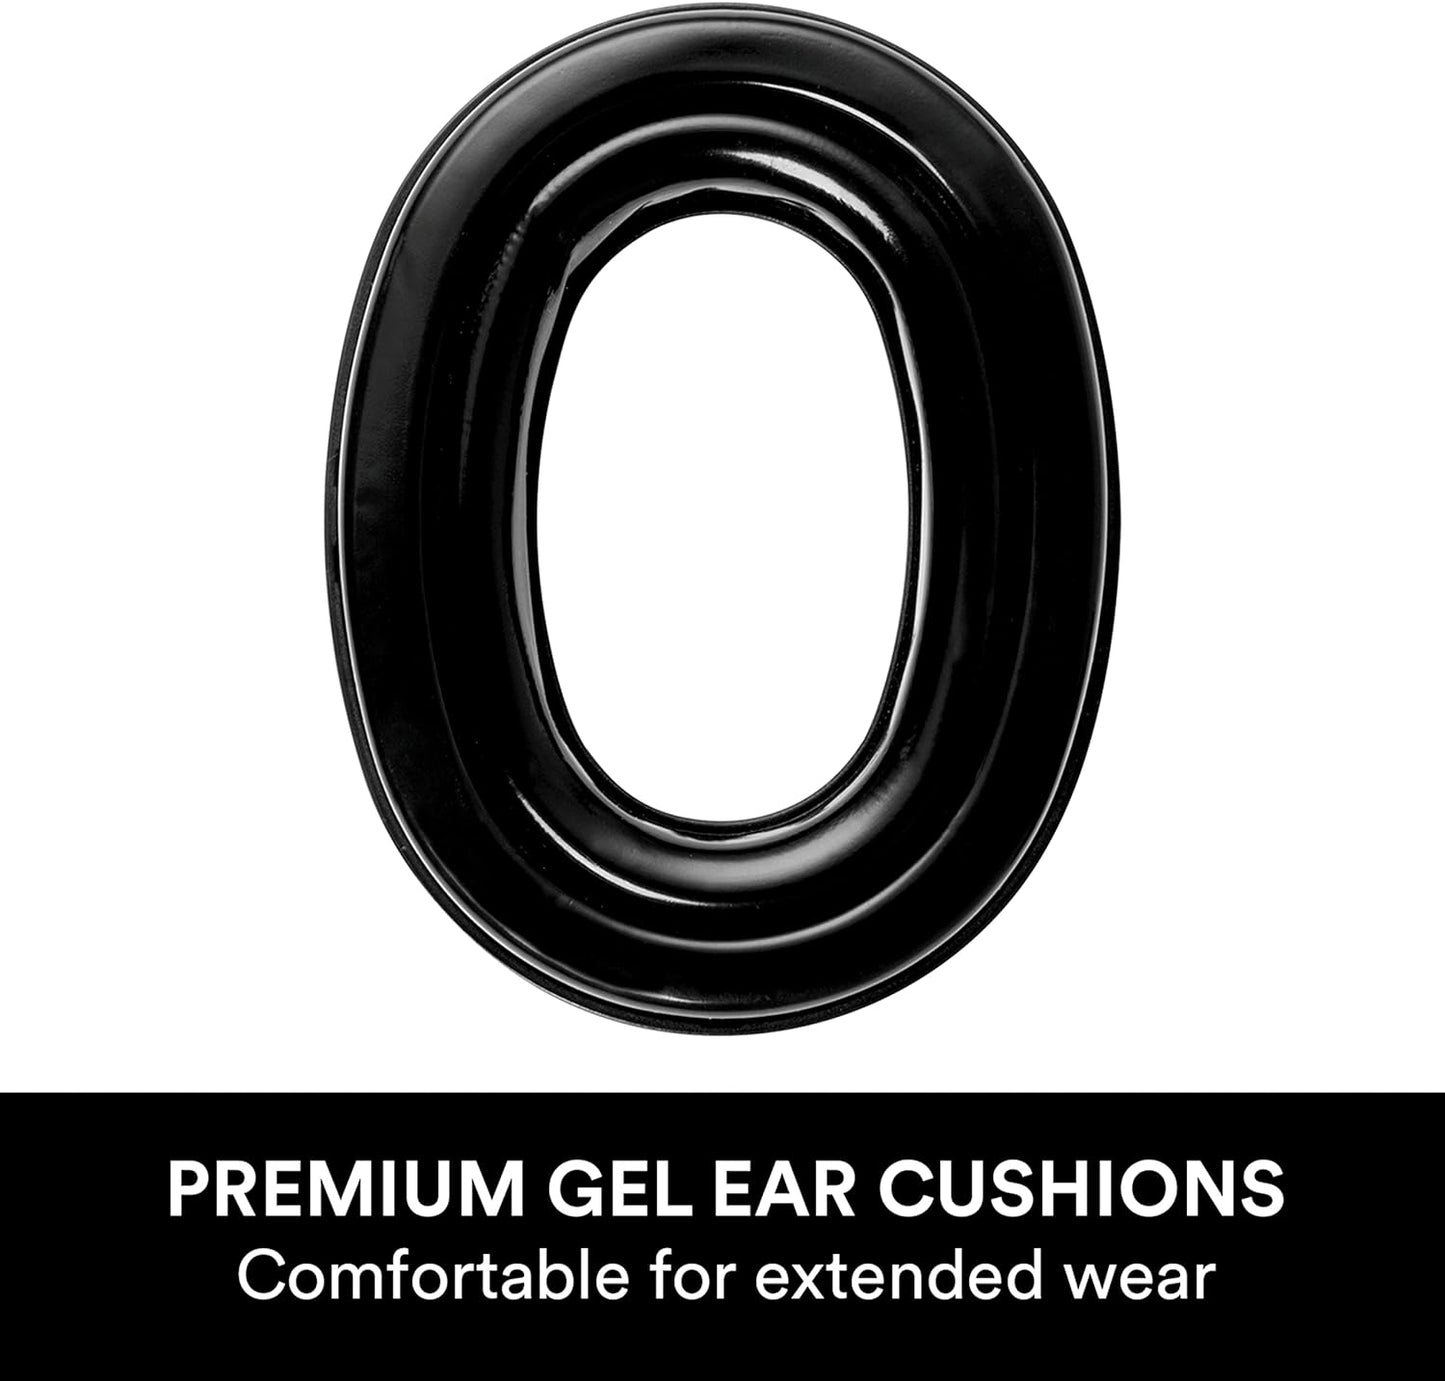 3M WorkTunes Connect + Gel Ear Cushions Hearing Protector with Bluetooth Wireless Technology, NRR 23 dB, Hearing protection for Mowing, Snowblowing, Construction, and Work Shops,Black